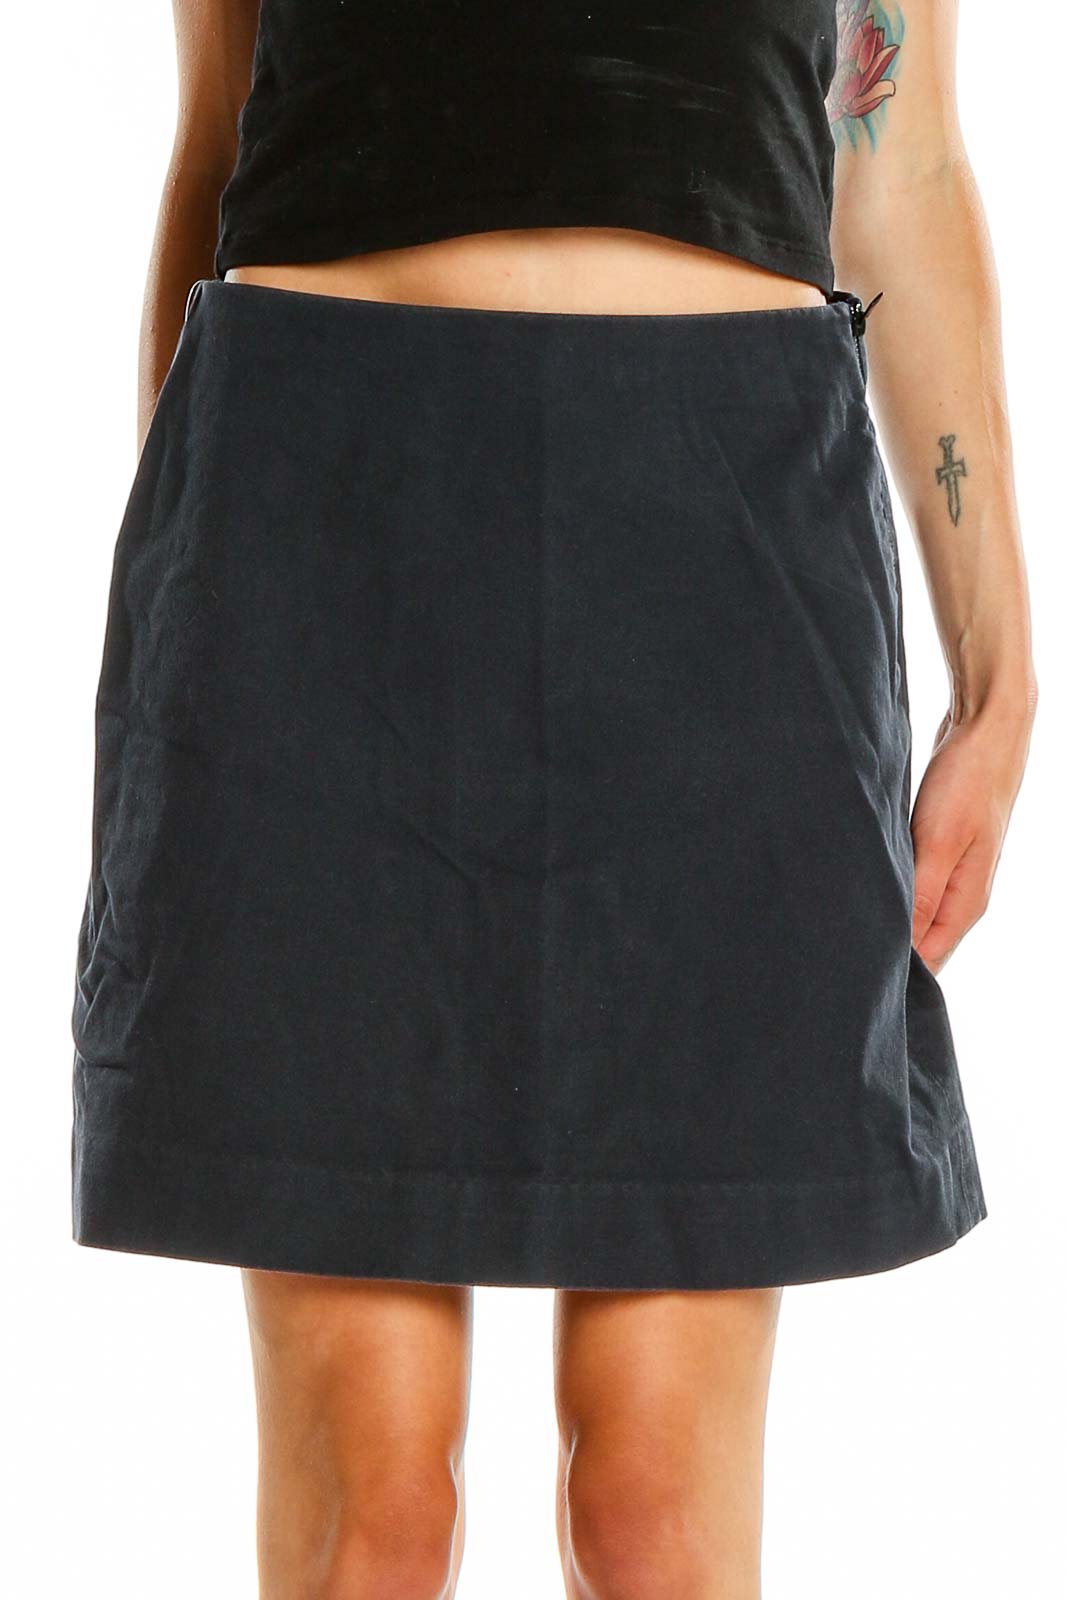 Blue Chic A-Line Skirt Front